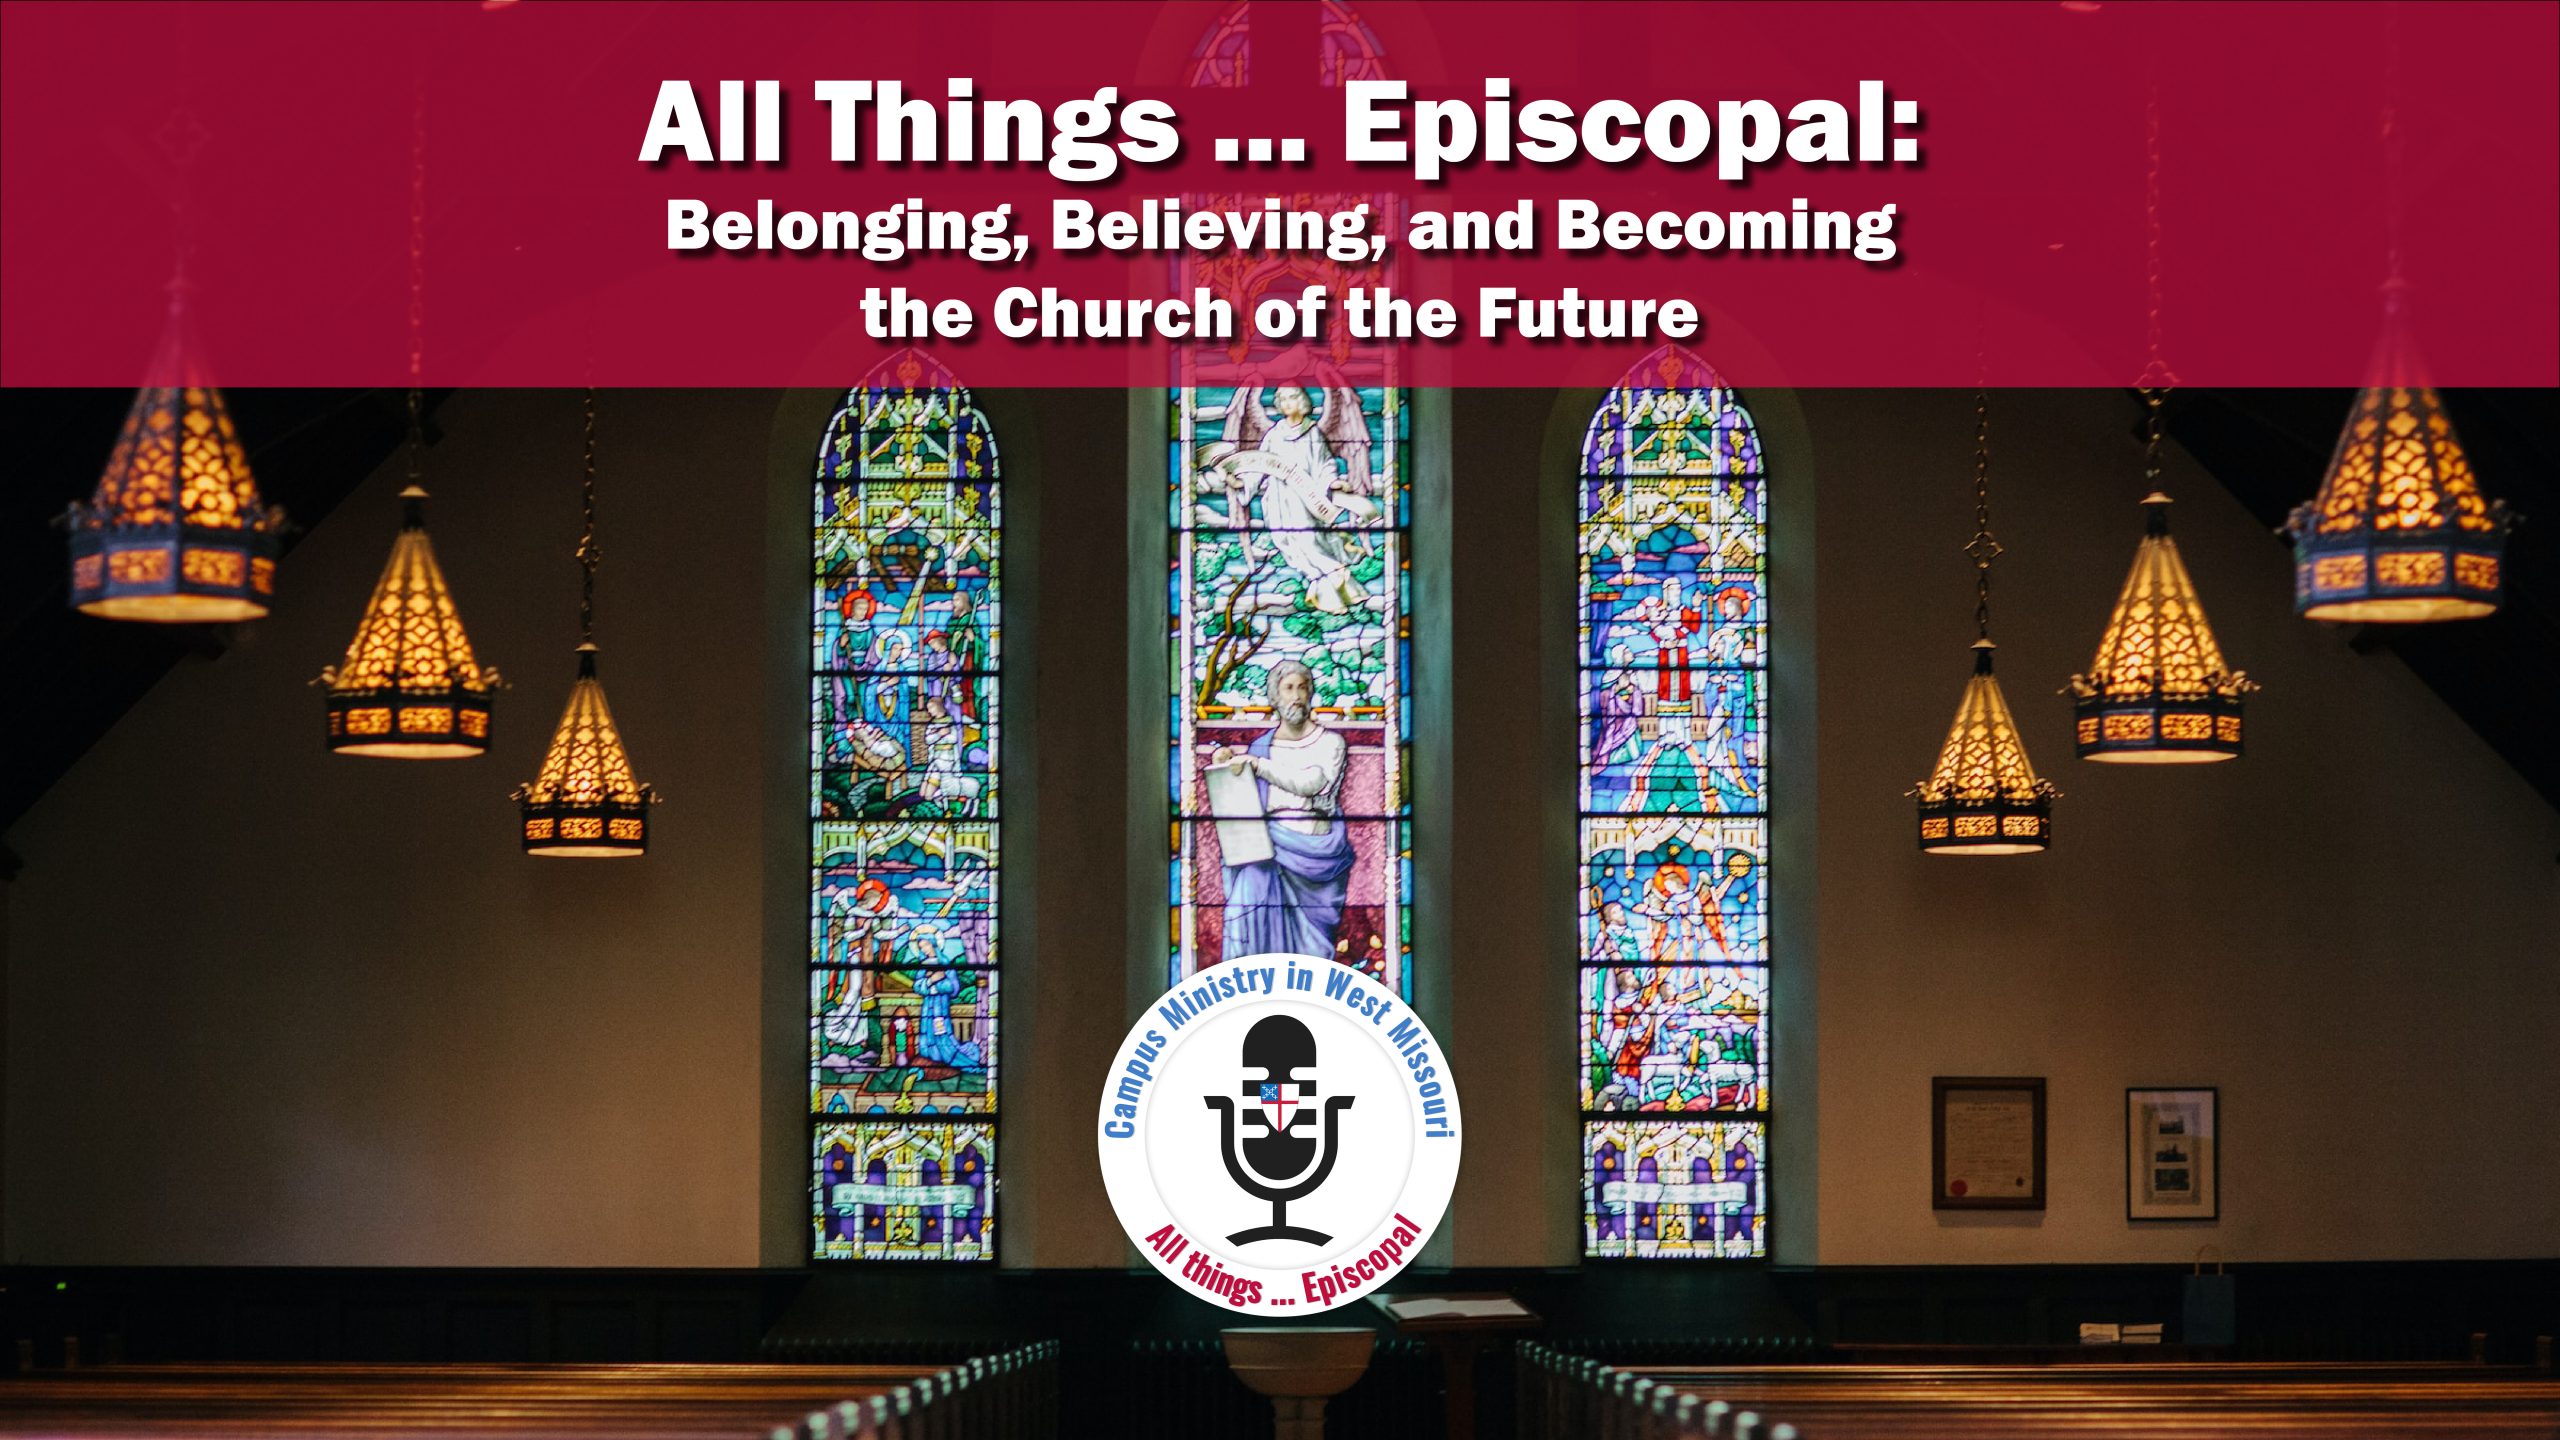 All Things … Episcopal: Belonging, Believing, and Becoming the Church of the Future